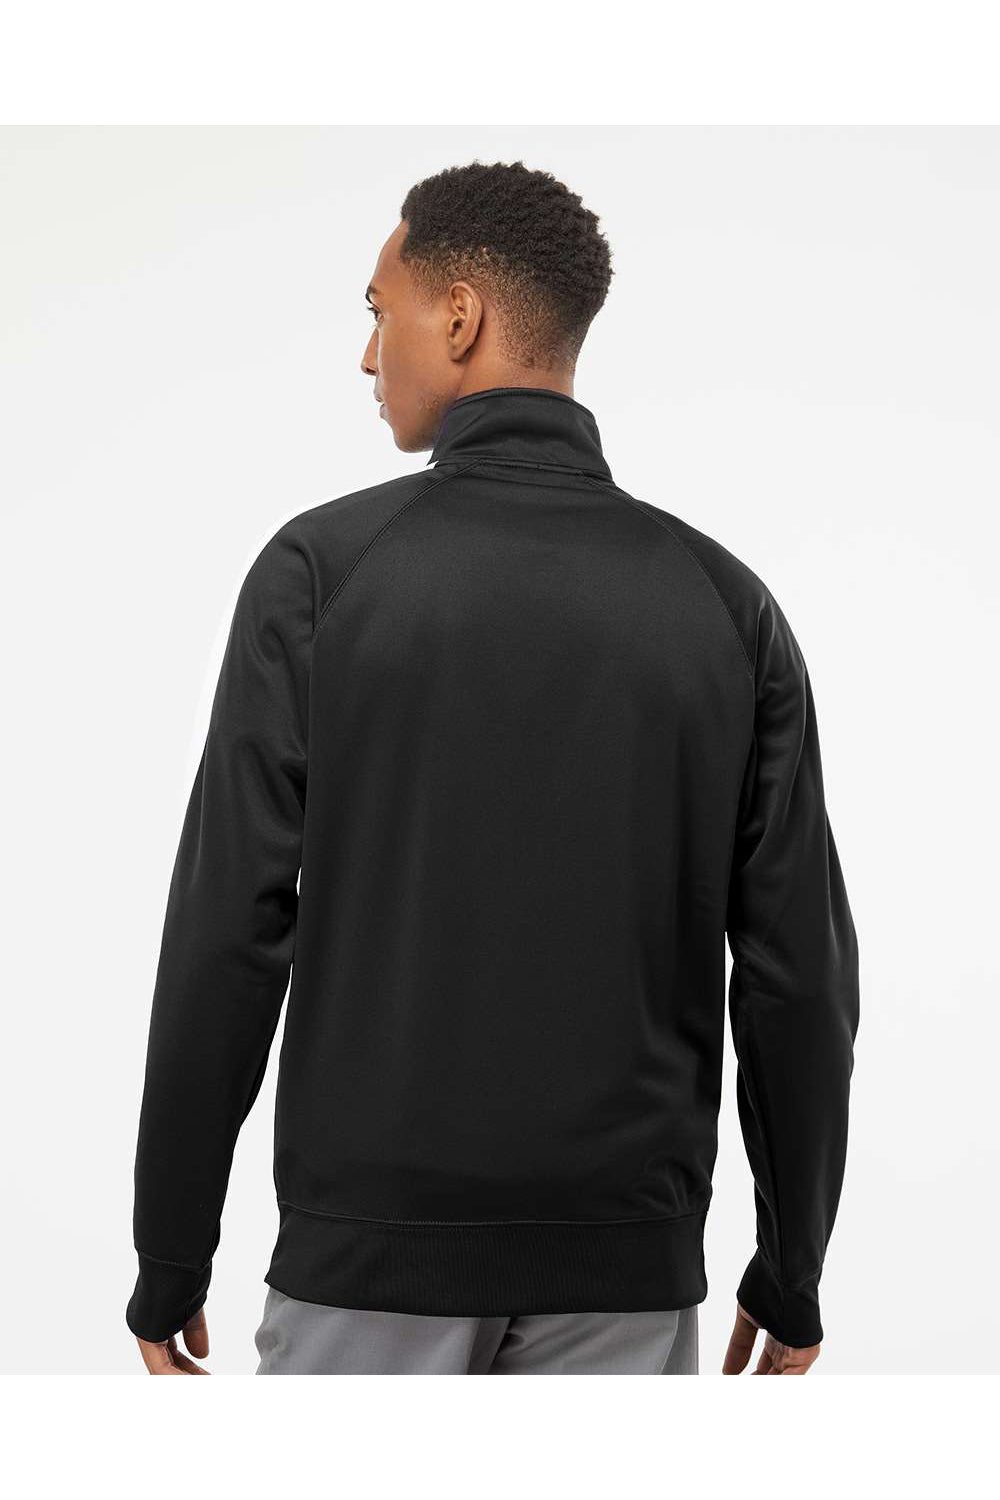 Independent Trading Co. EXP70PTZ Mens Poly Tech Full Zip Track Jacket Black/White Model Back